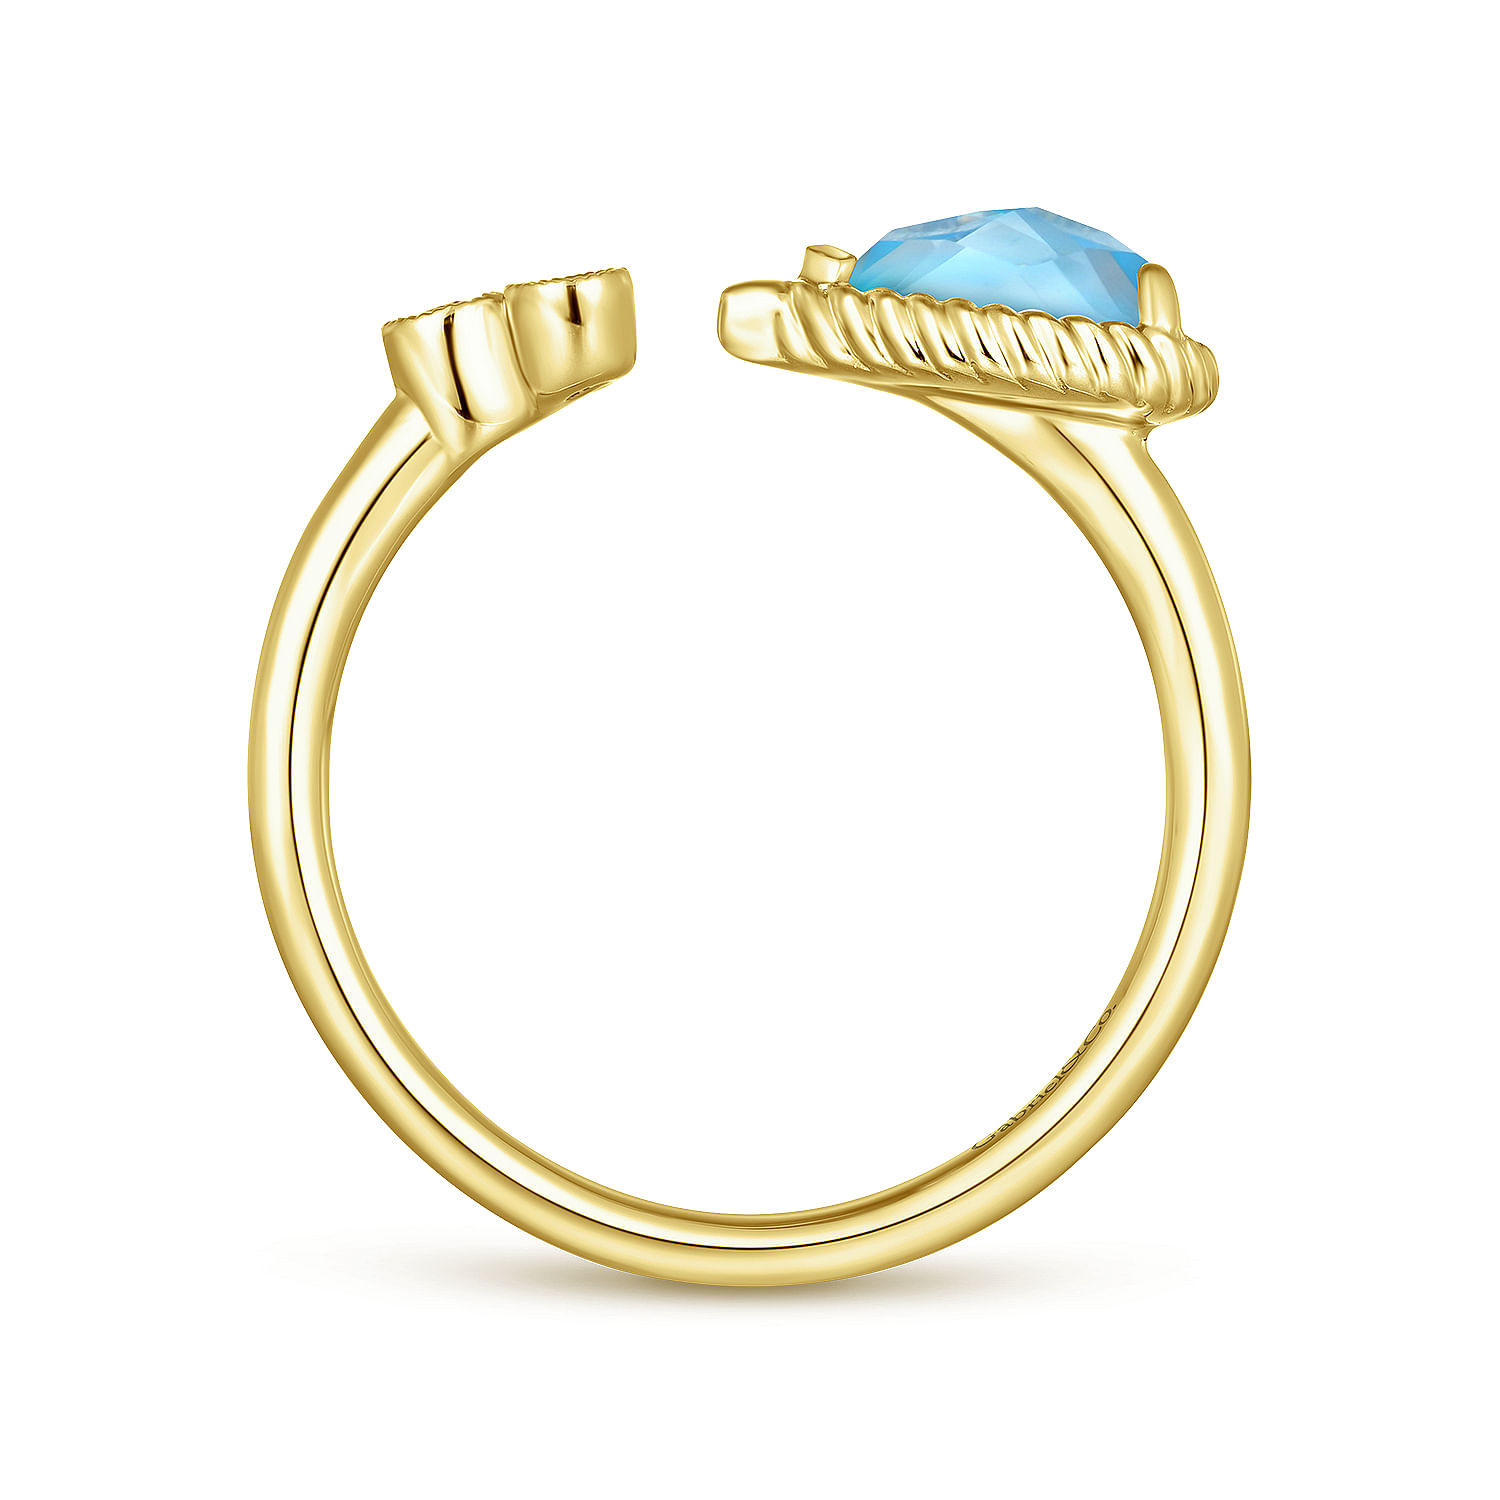 14K Yellow Gold Pear Shaped Rock Crystal/Turquoise Split Ring with Diamonds